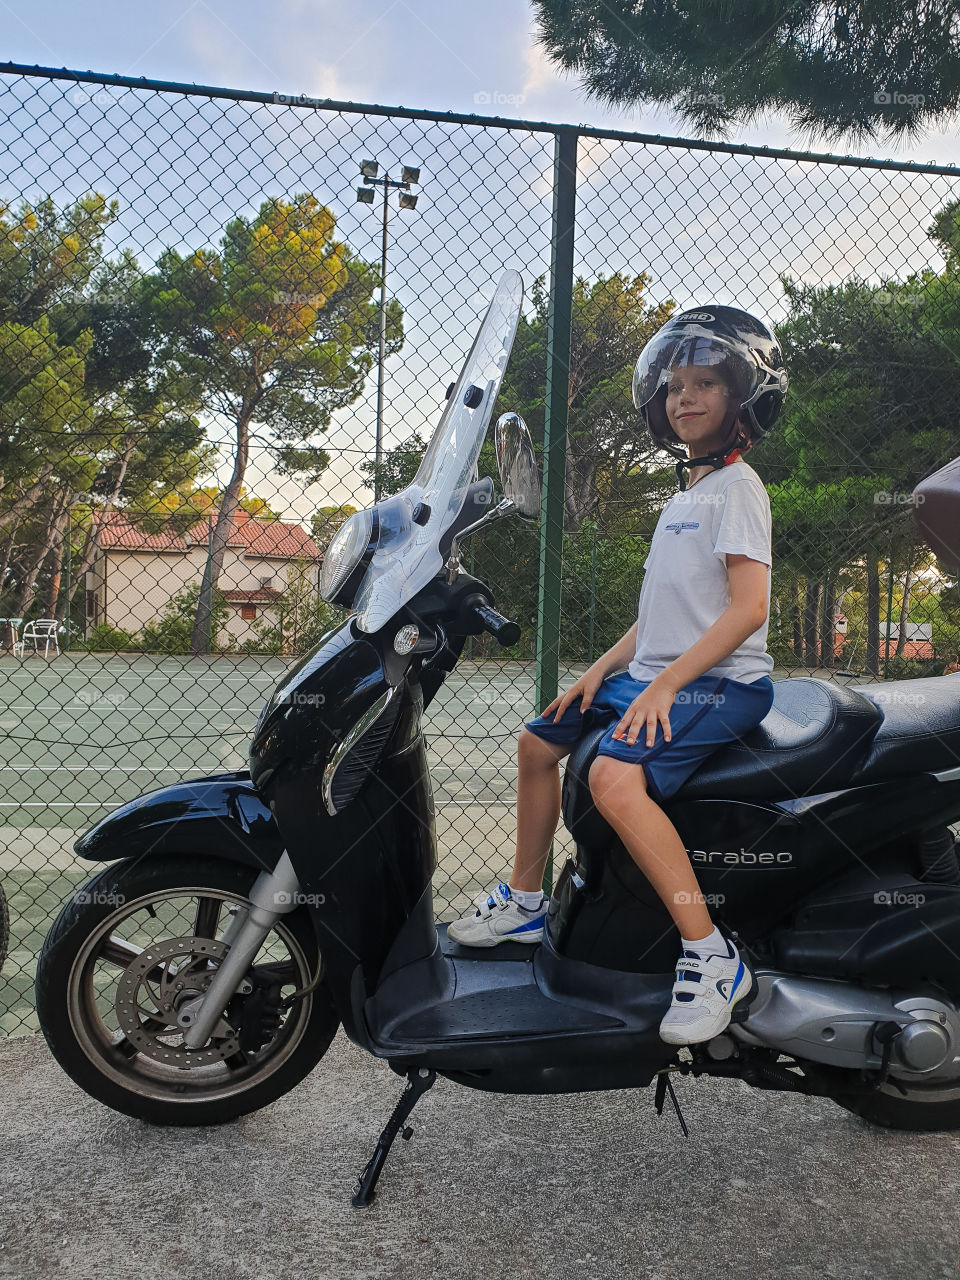 A boy sitting on a motorbike in a helmet on the background of a tennis court.  Summer holidays